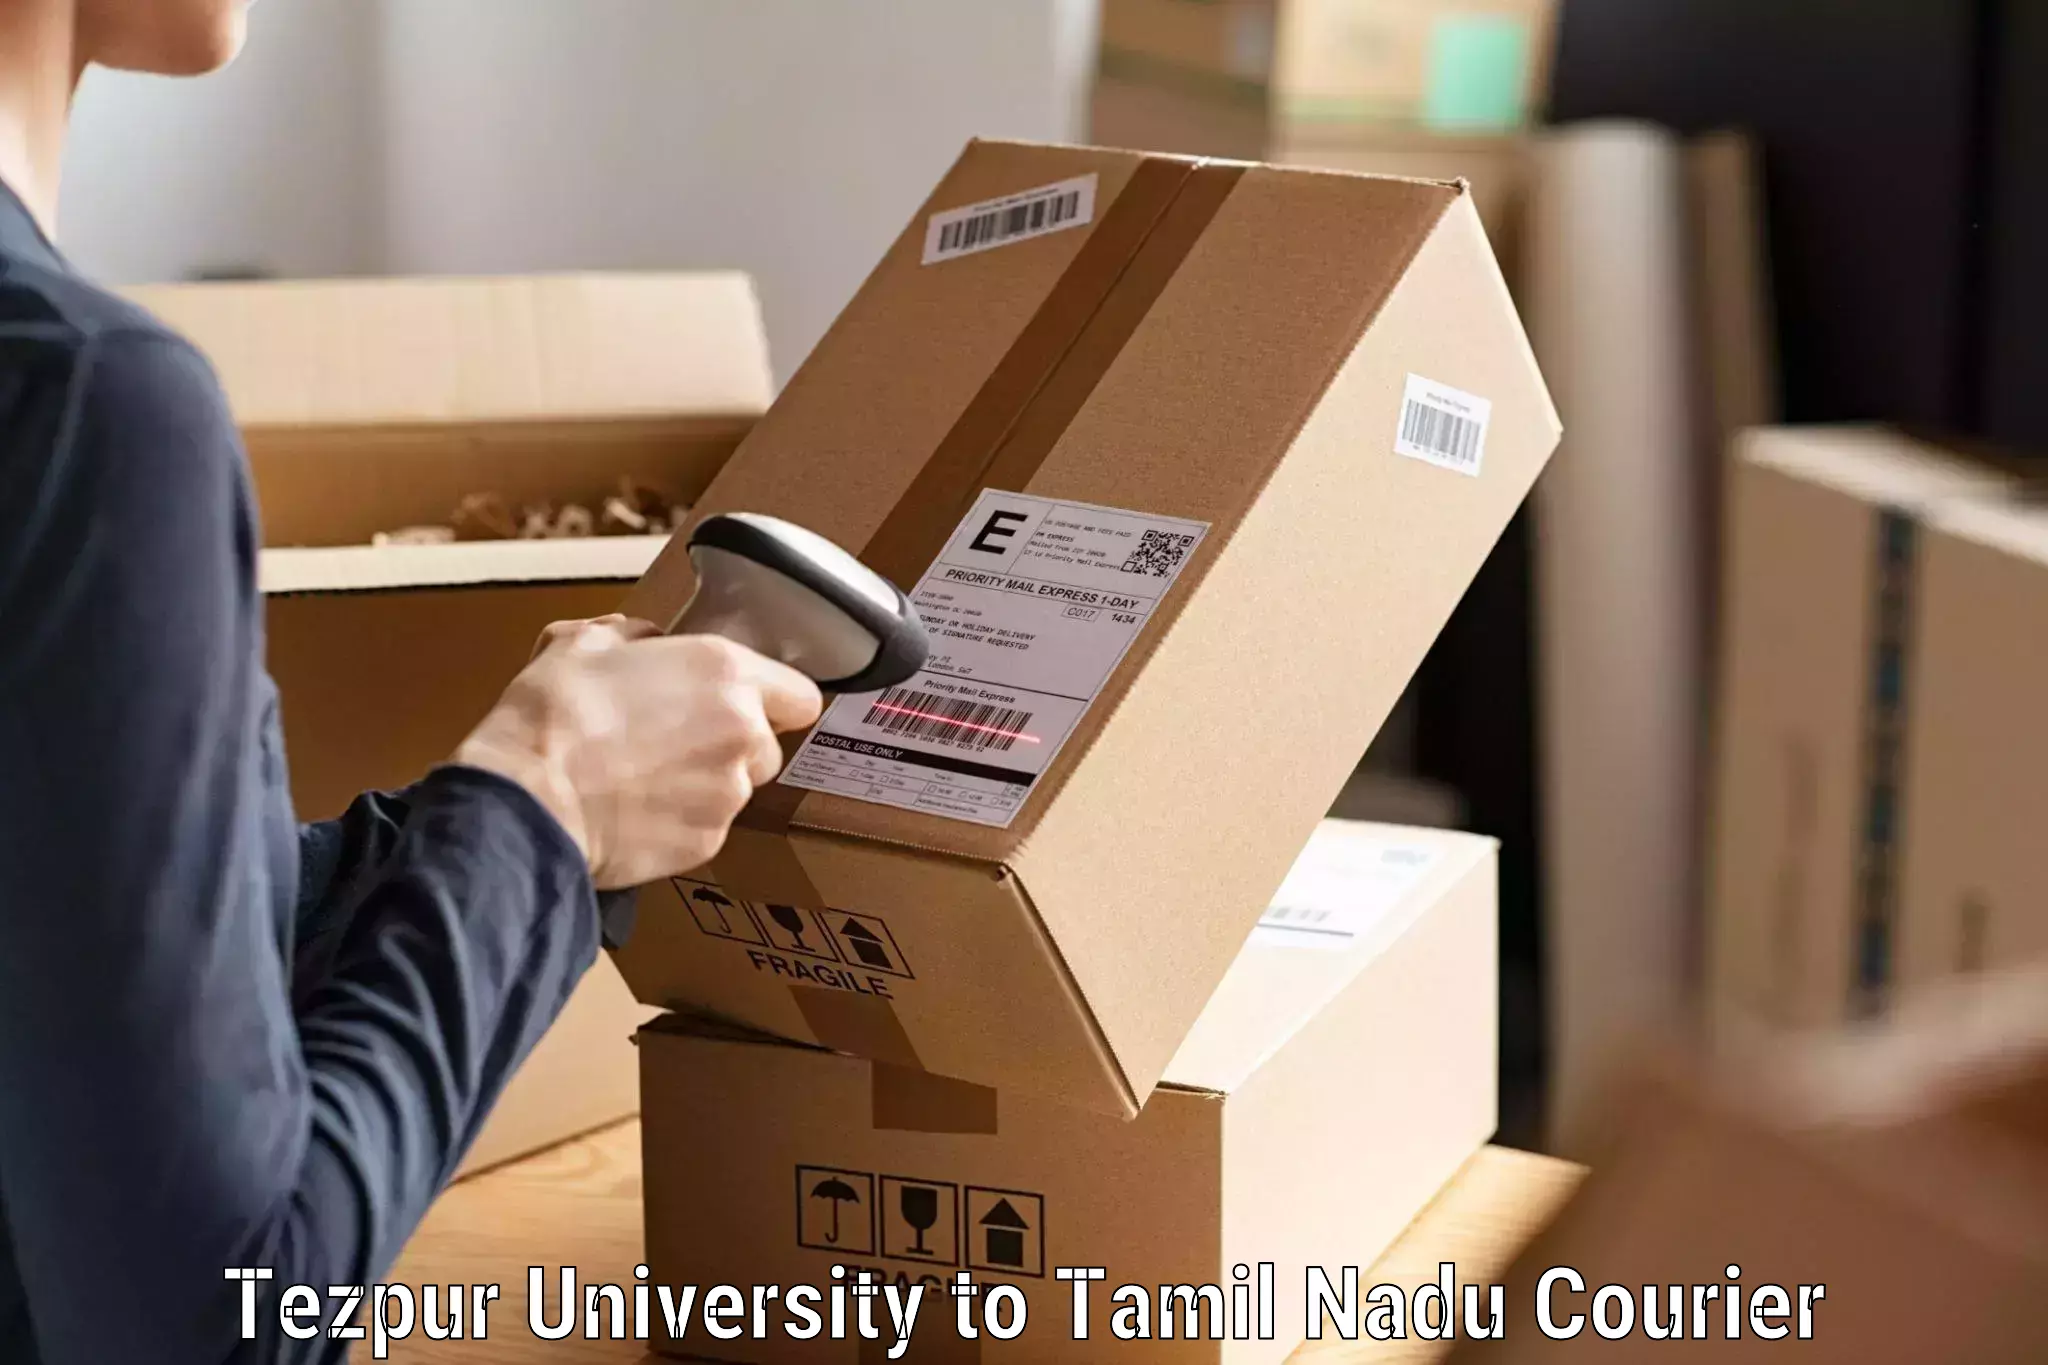 International courier networks Tezpur University to Trichy